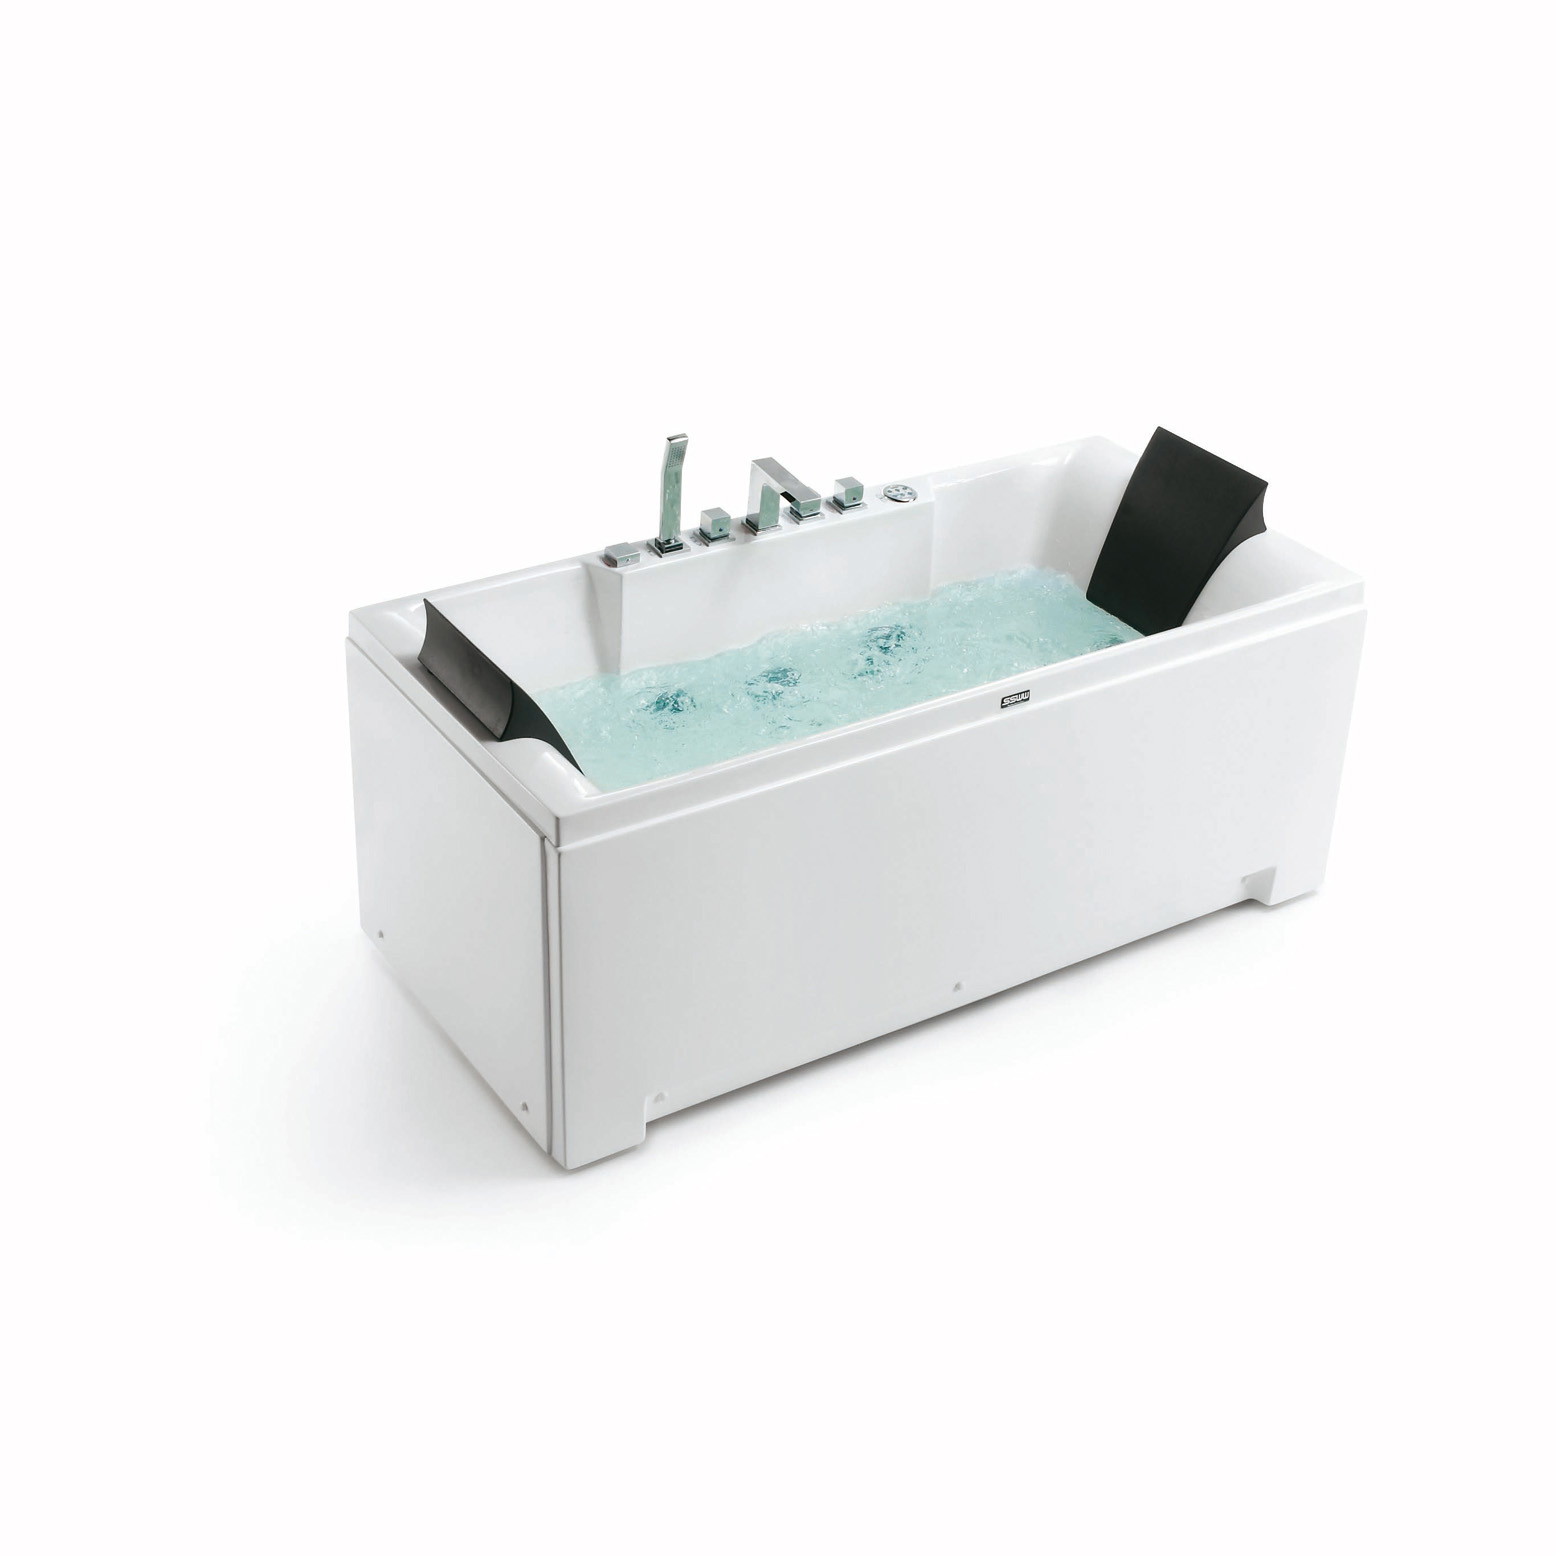 Modern and Stylish Wash Basins: Latest Trends and Designs Unveiled